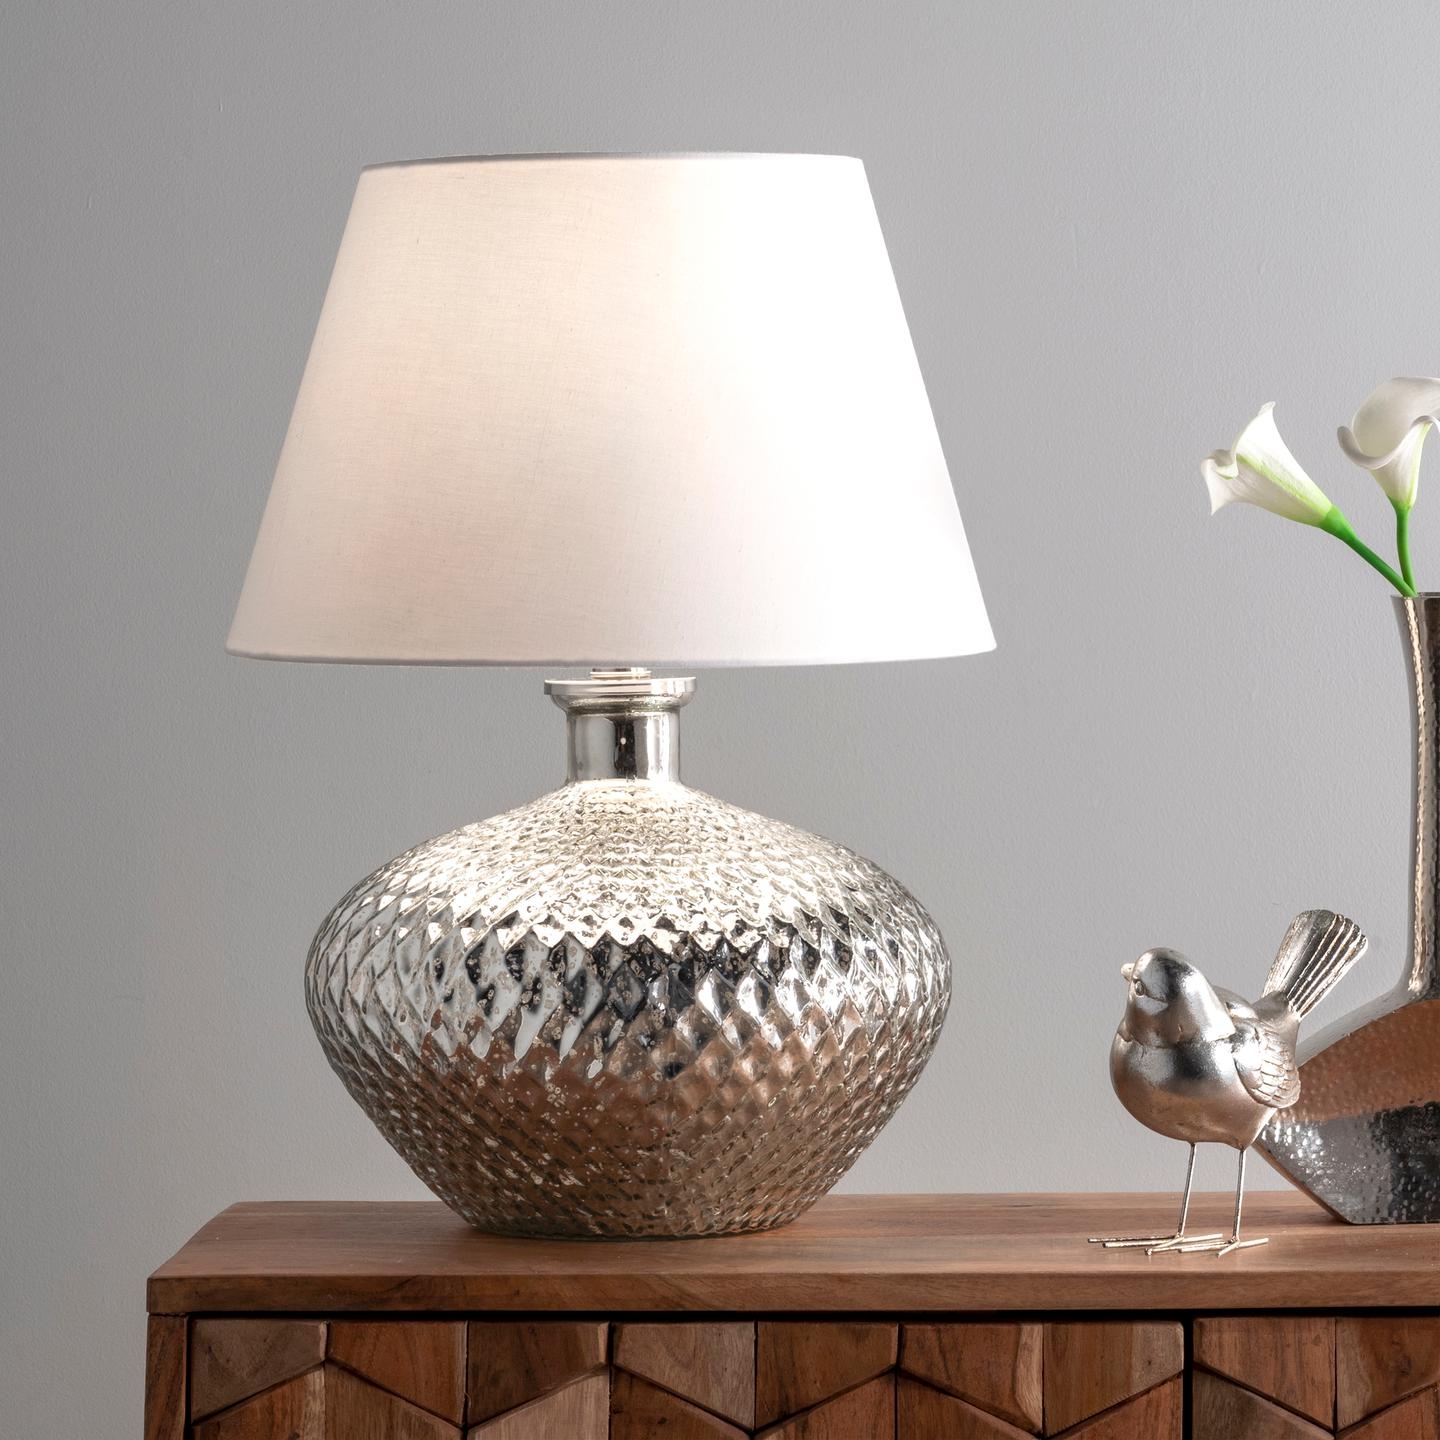 Alhambra 19" Glass Table Lamp - Image 1